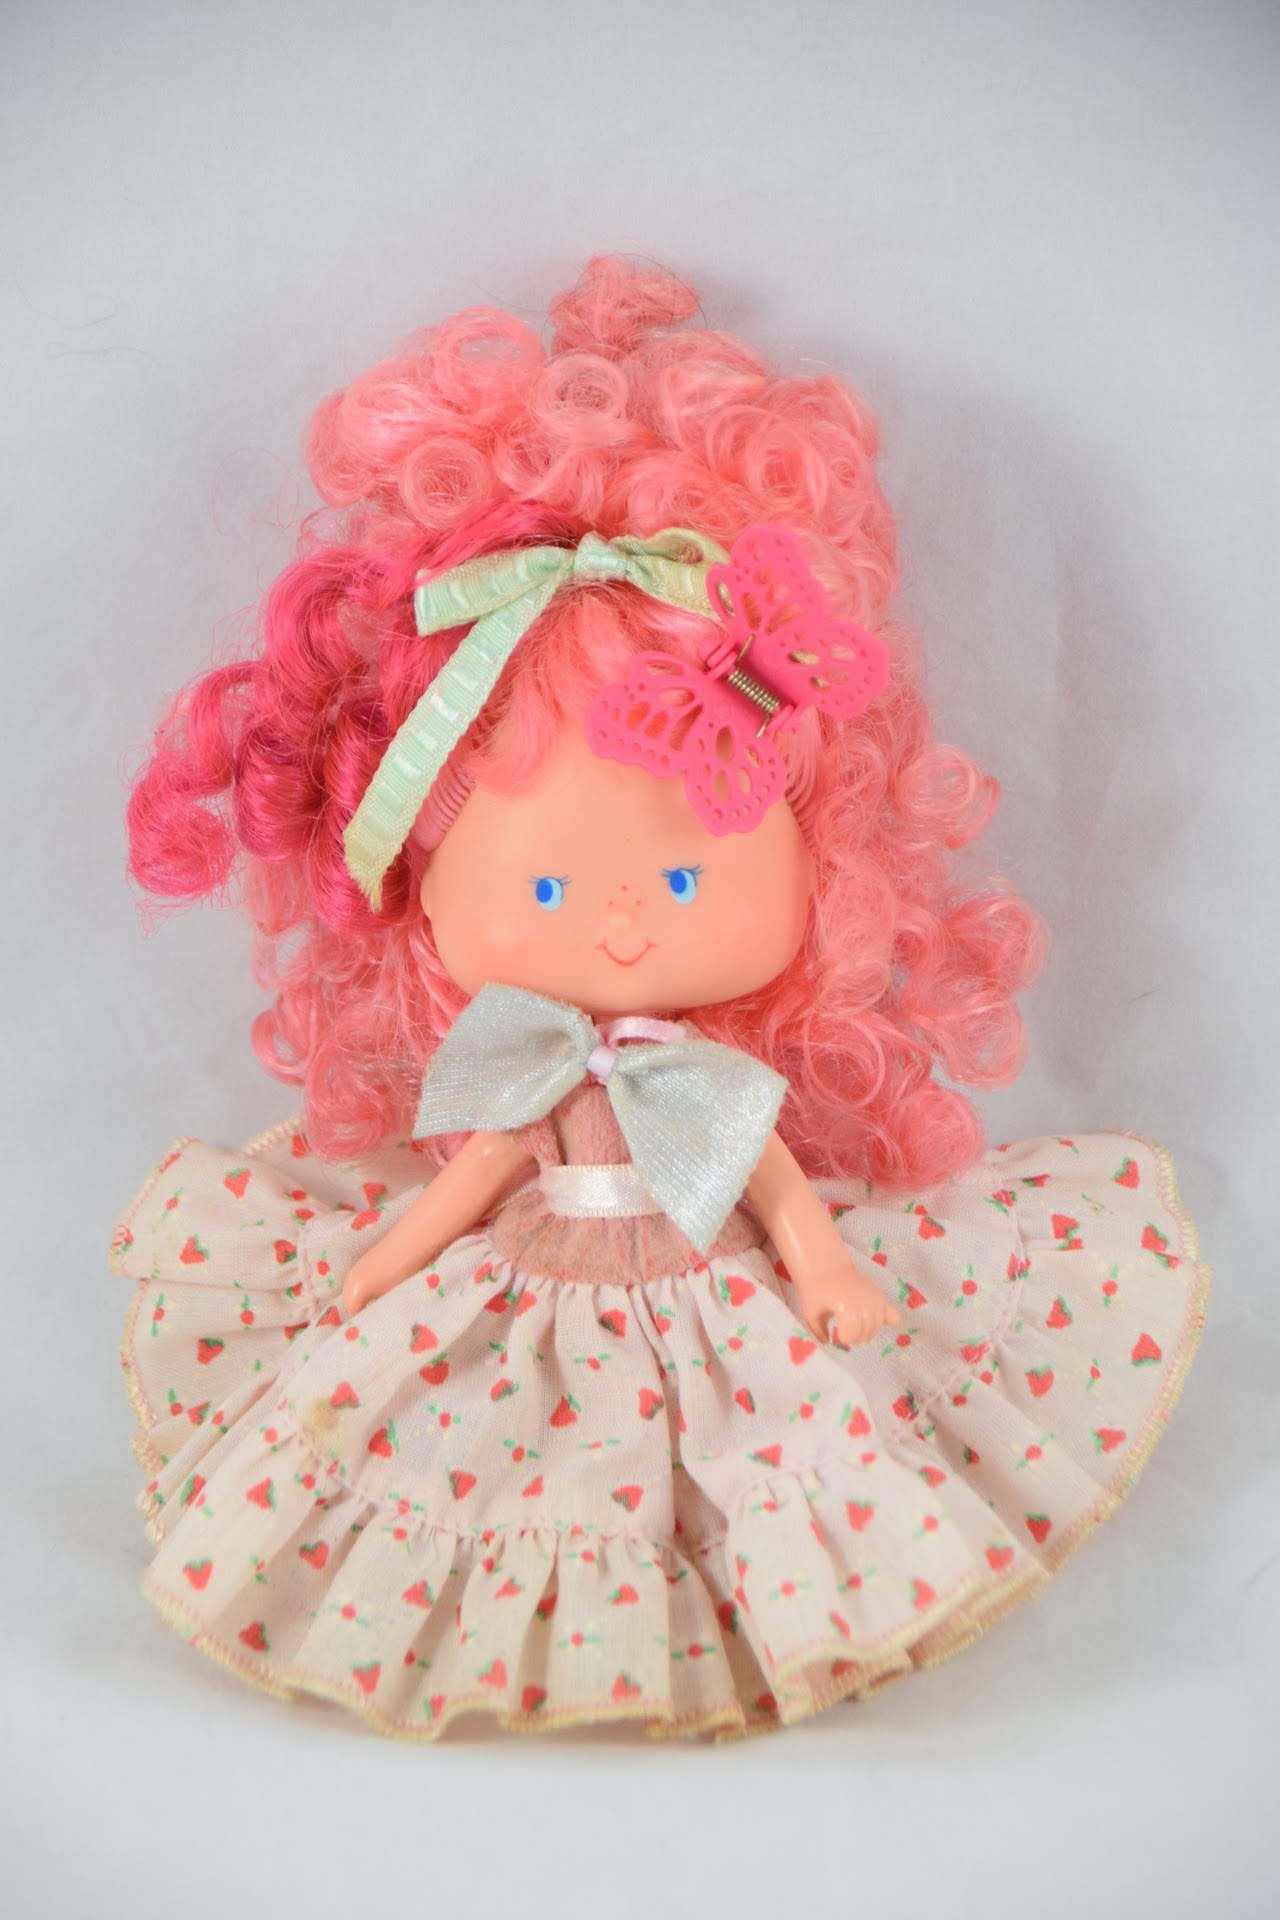 Replacement Gold Headband for Angel Cake Strawberry Shortcake Doll